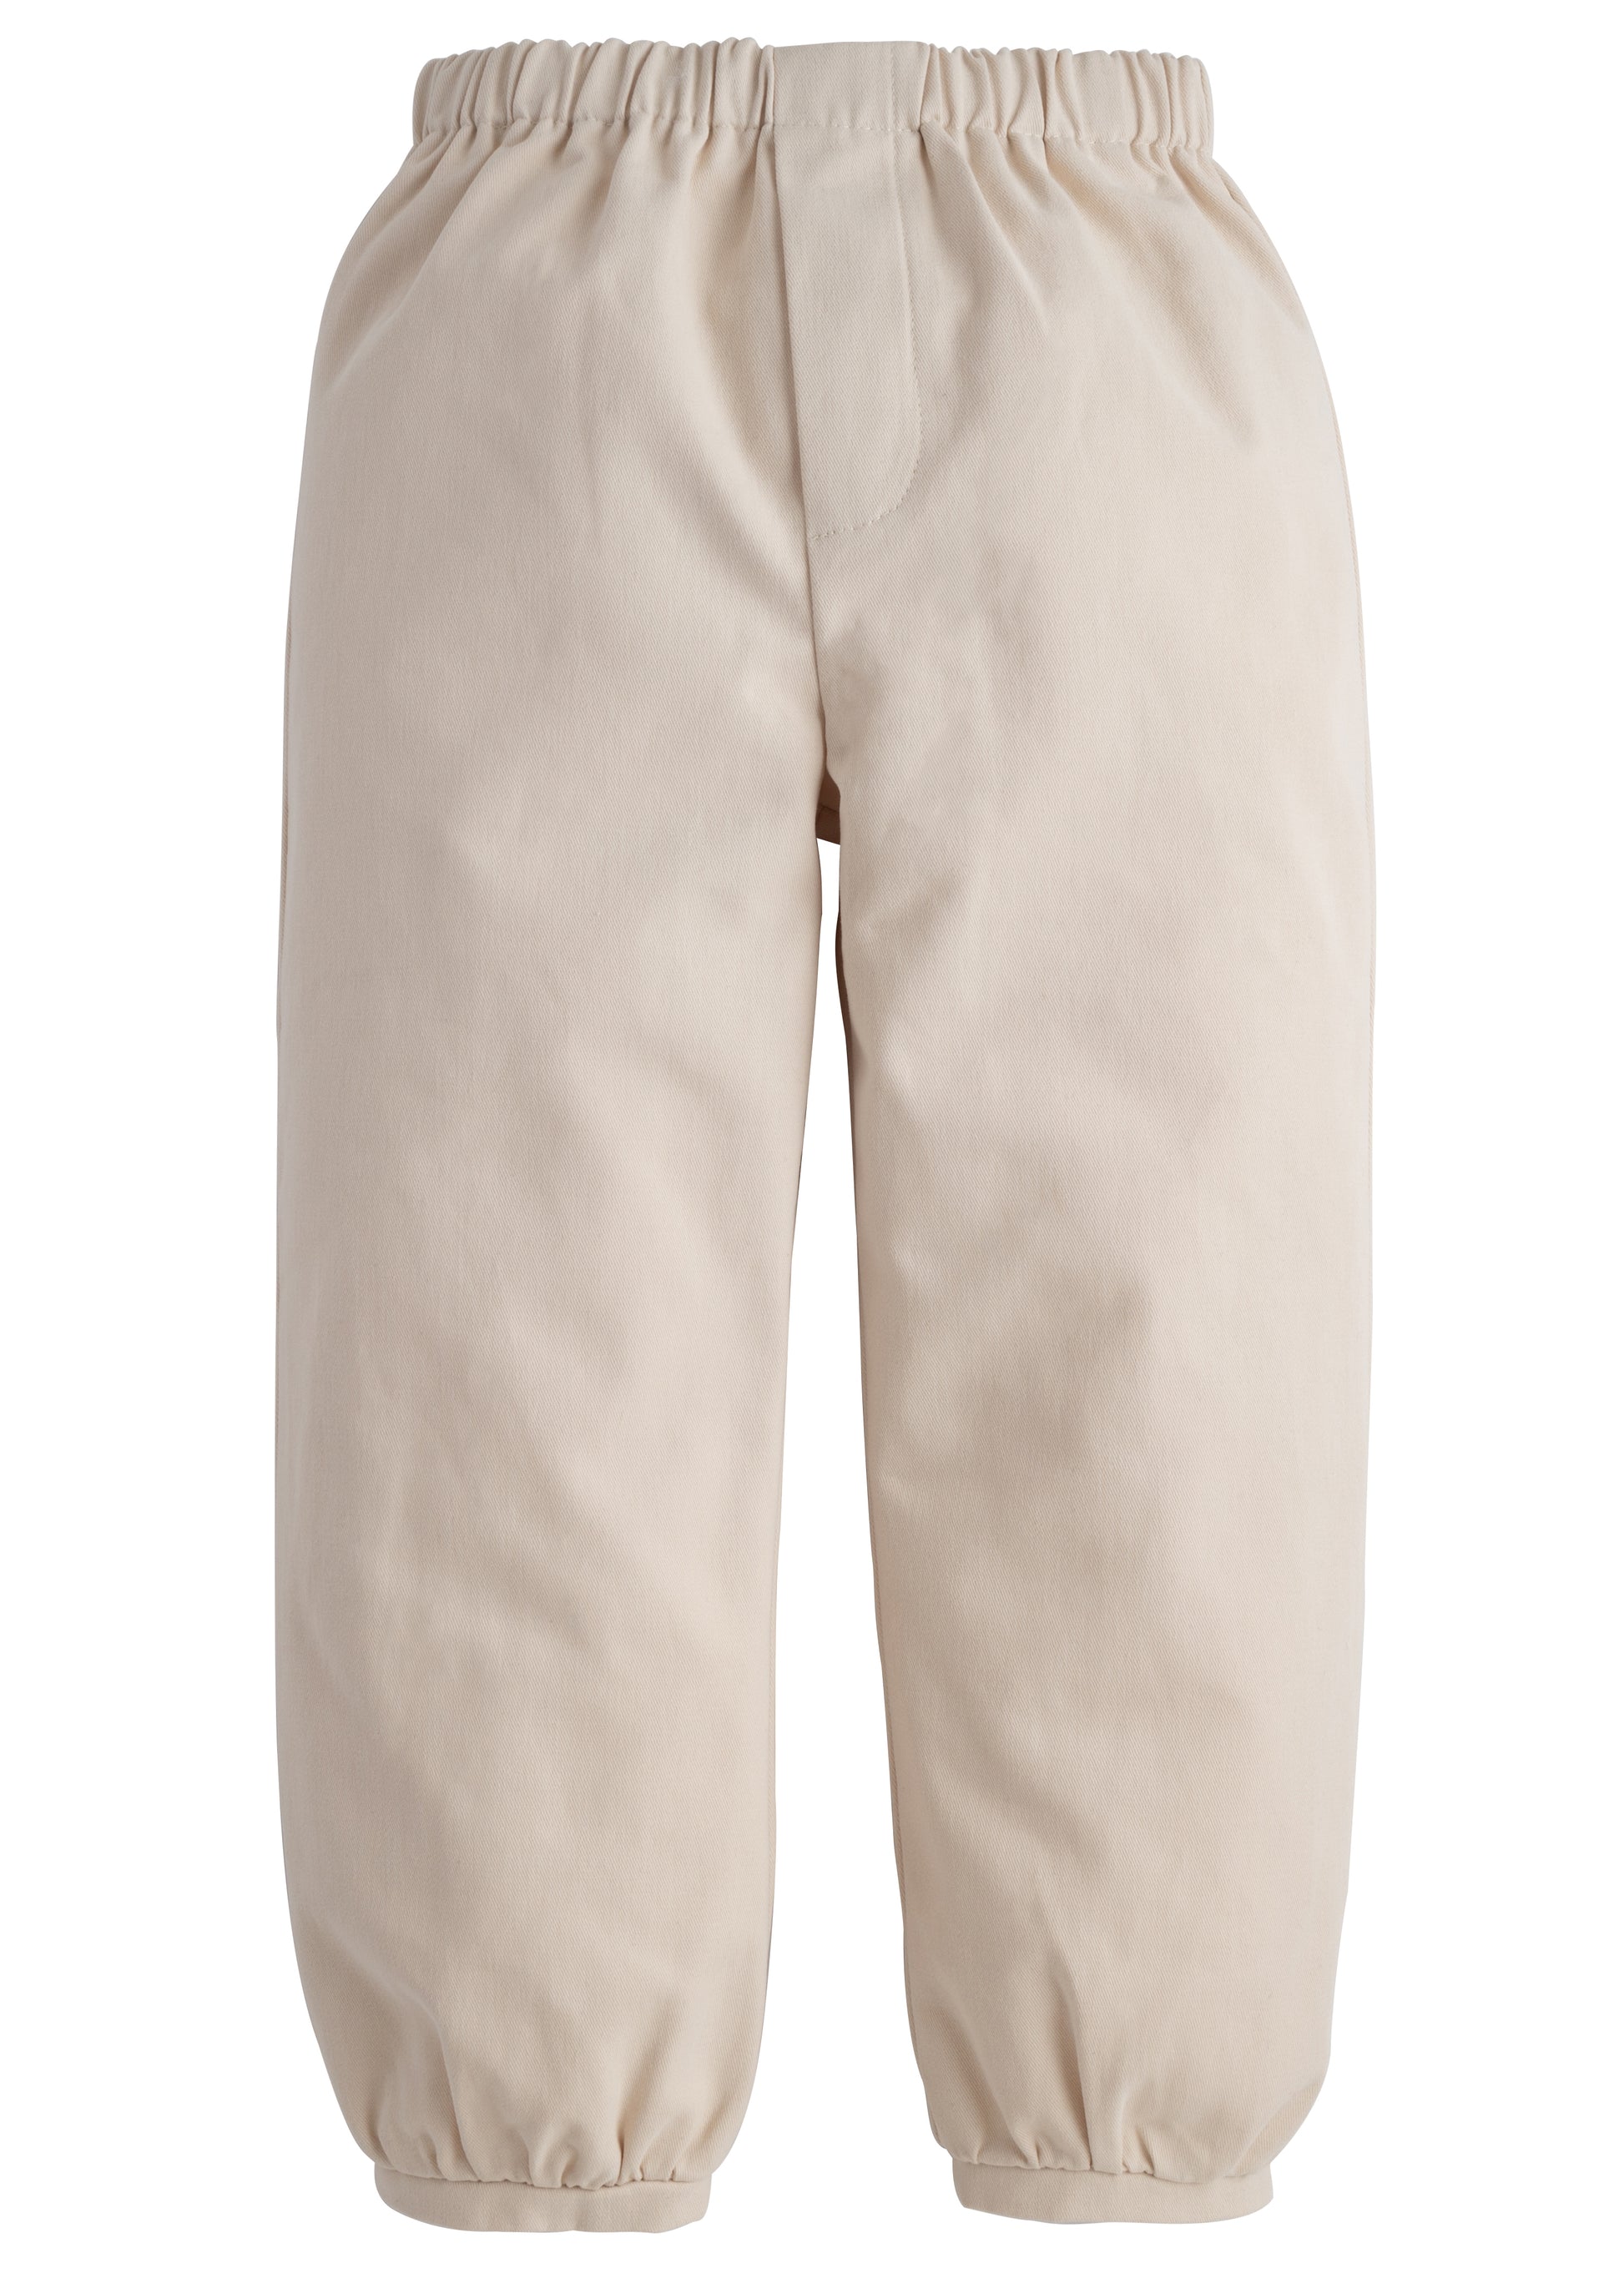 Little English Banded Pull On Pant - Pebble Twill